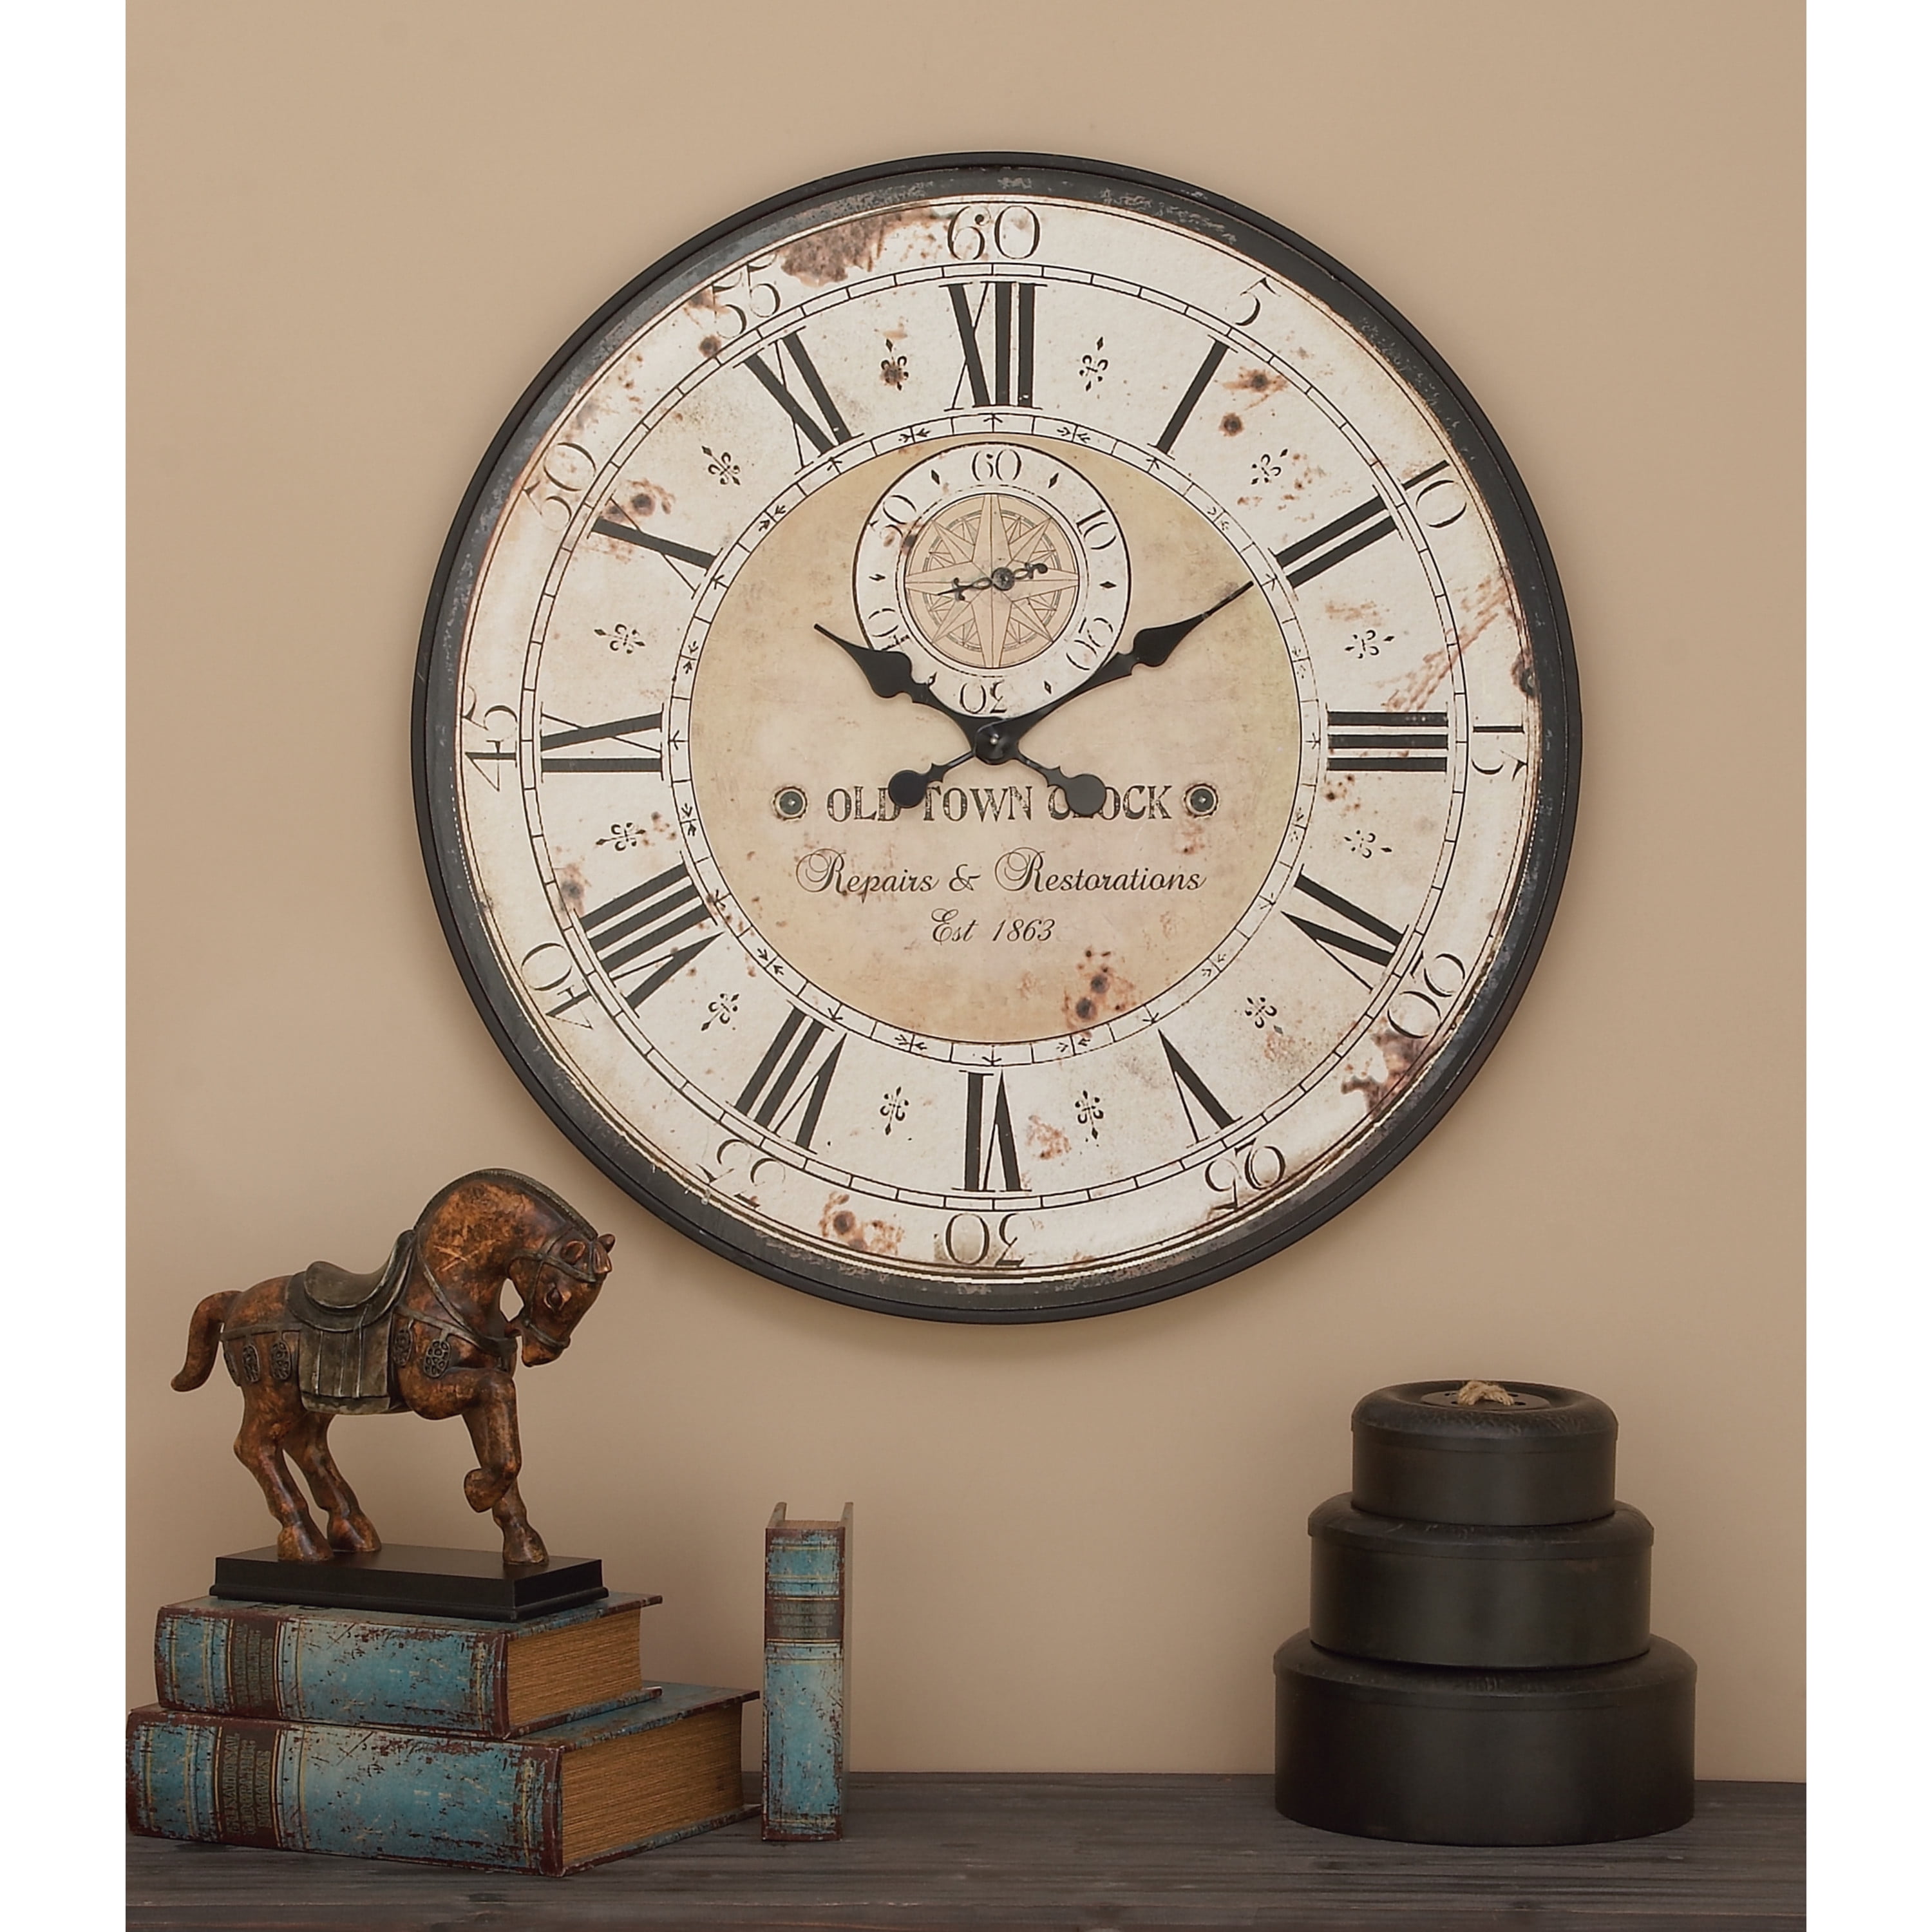 Old Vintage Wall Clock Wall Decal StickerVintage ClockVinyl Retro Style 